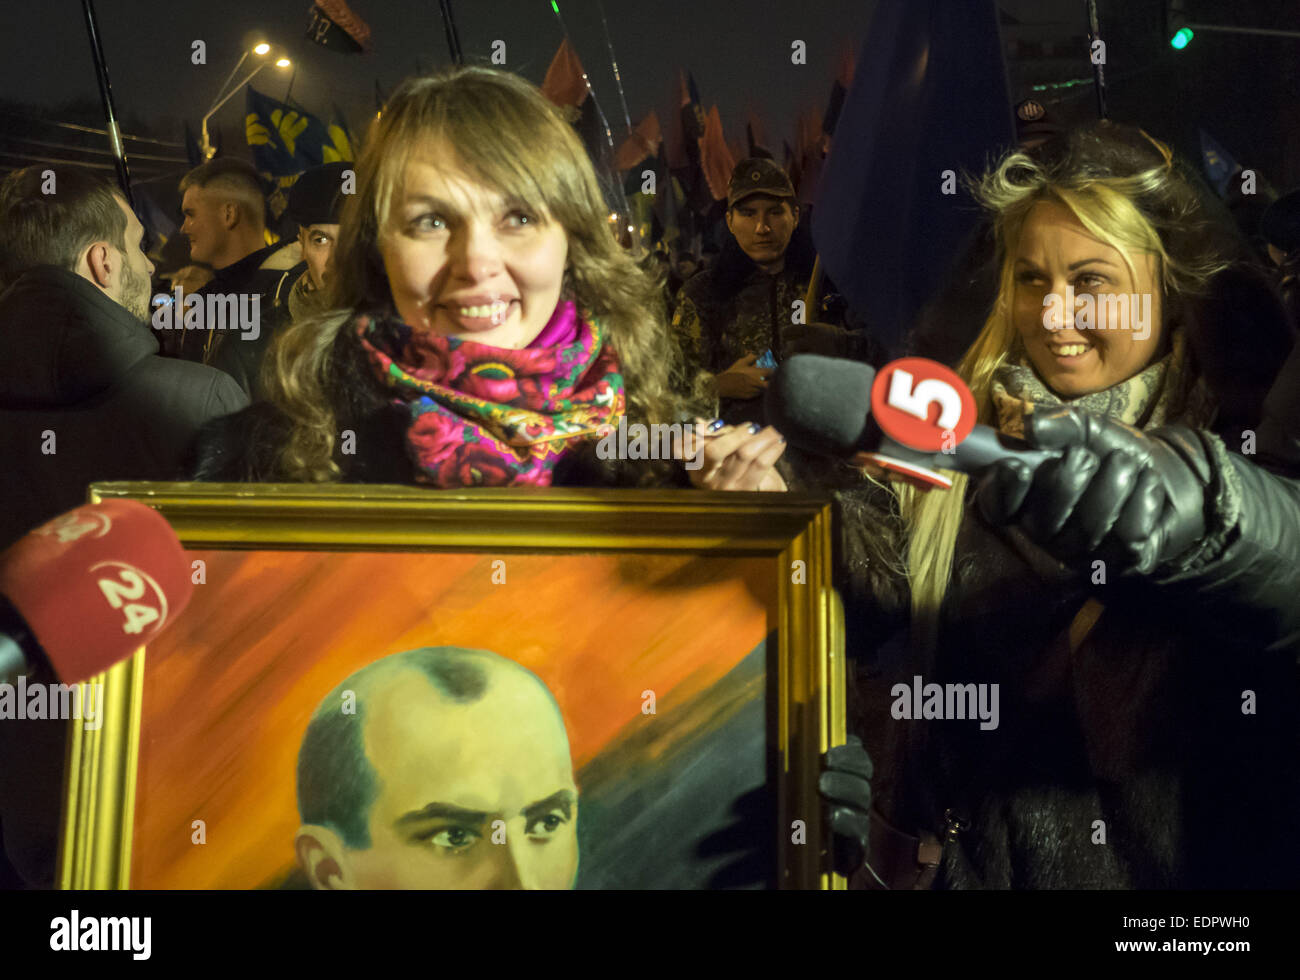 Jan. 1, 2015 - LifeNews journalist Zhanna Karpenko (R) interviews marchers. - Police detained a suspect in the attack on journalists during a torch procession January 1, 2015 in Kiev, Ukraine, in honor of the 106th anniversary of the birth of the conductor OUN Stepan Bandera. The collision damaged the camera operator, while the journalist's mobile phone. The assailant was charged with obstruction of the lawful professional activities of journalists and robbery. (Credit Image: © Igor Golovniov/ZUMA Wire) Stock Photo